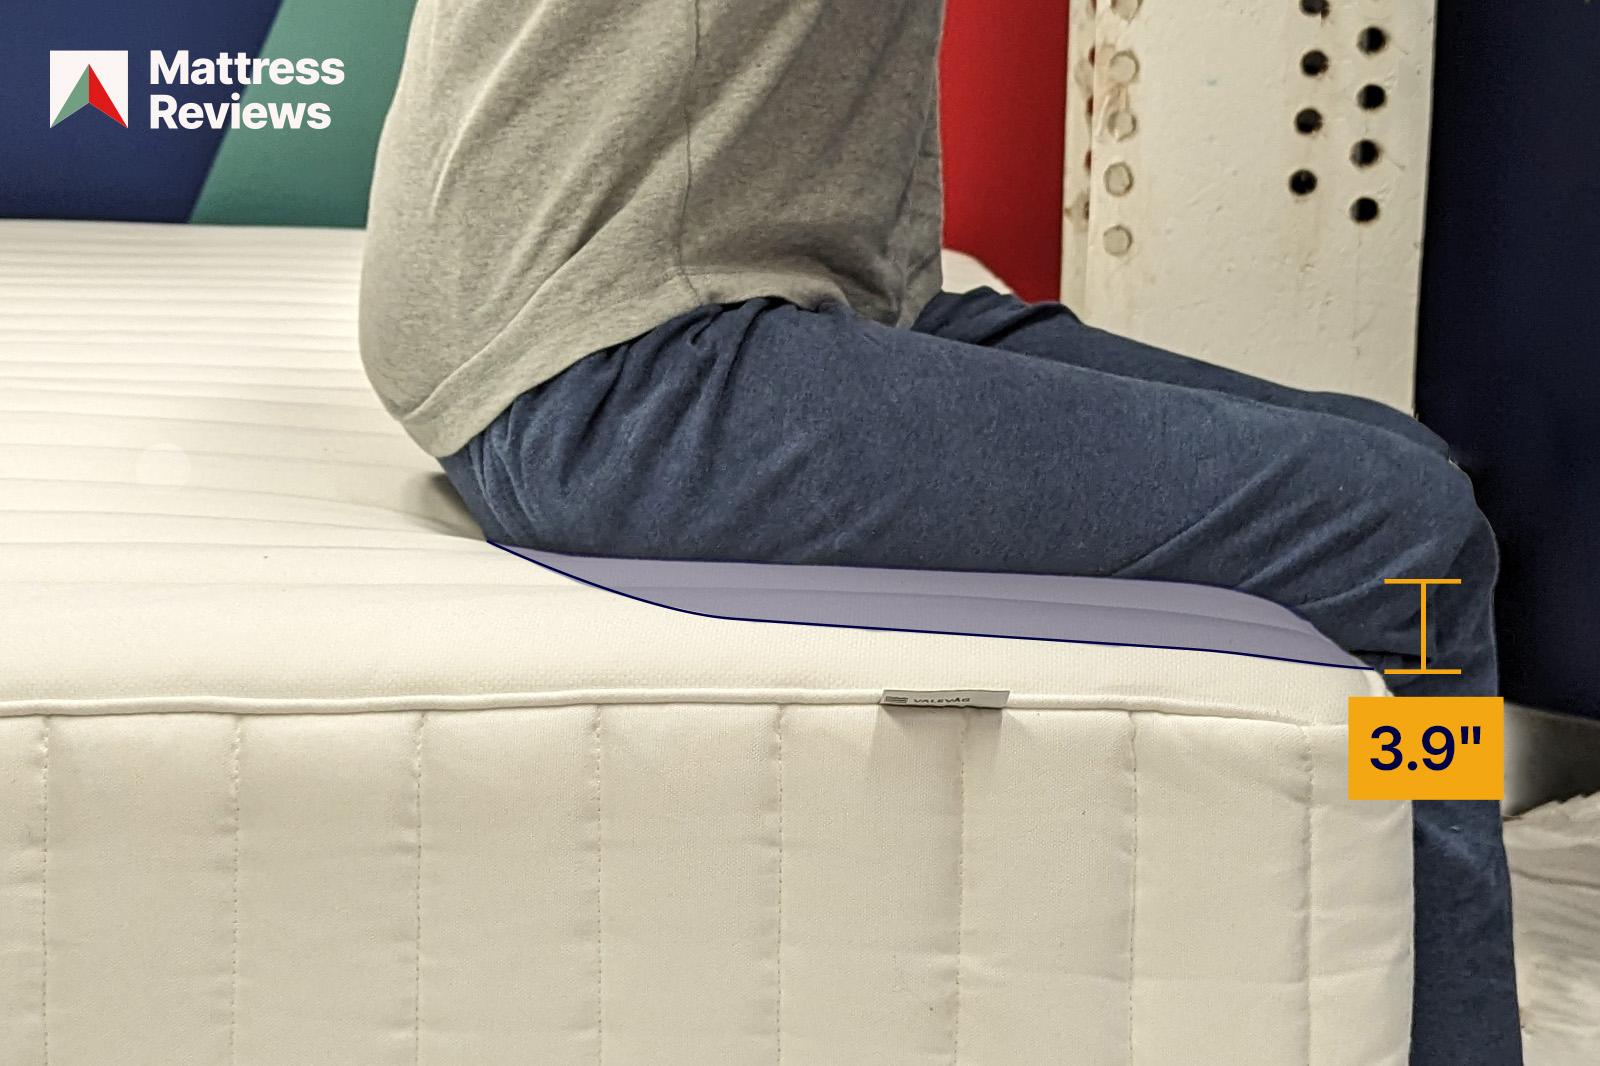 photo of a mannequin sitting on the edge of the IKEA Valevag mattress, showing a displacement of 3.9